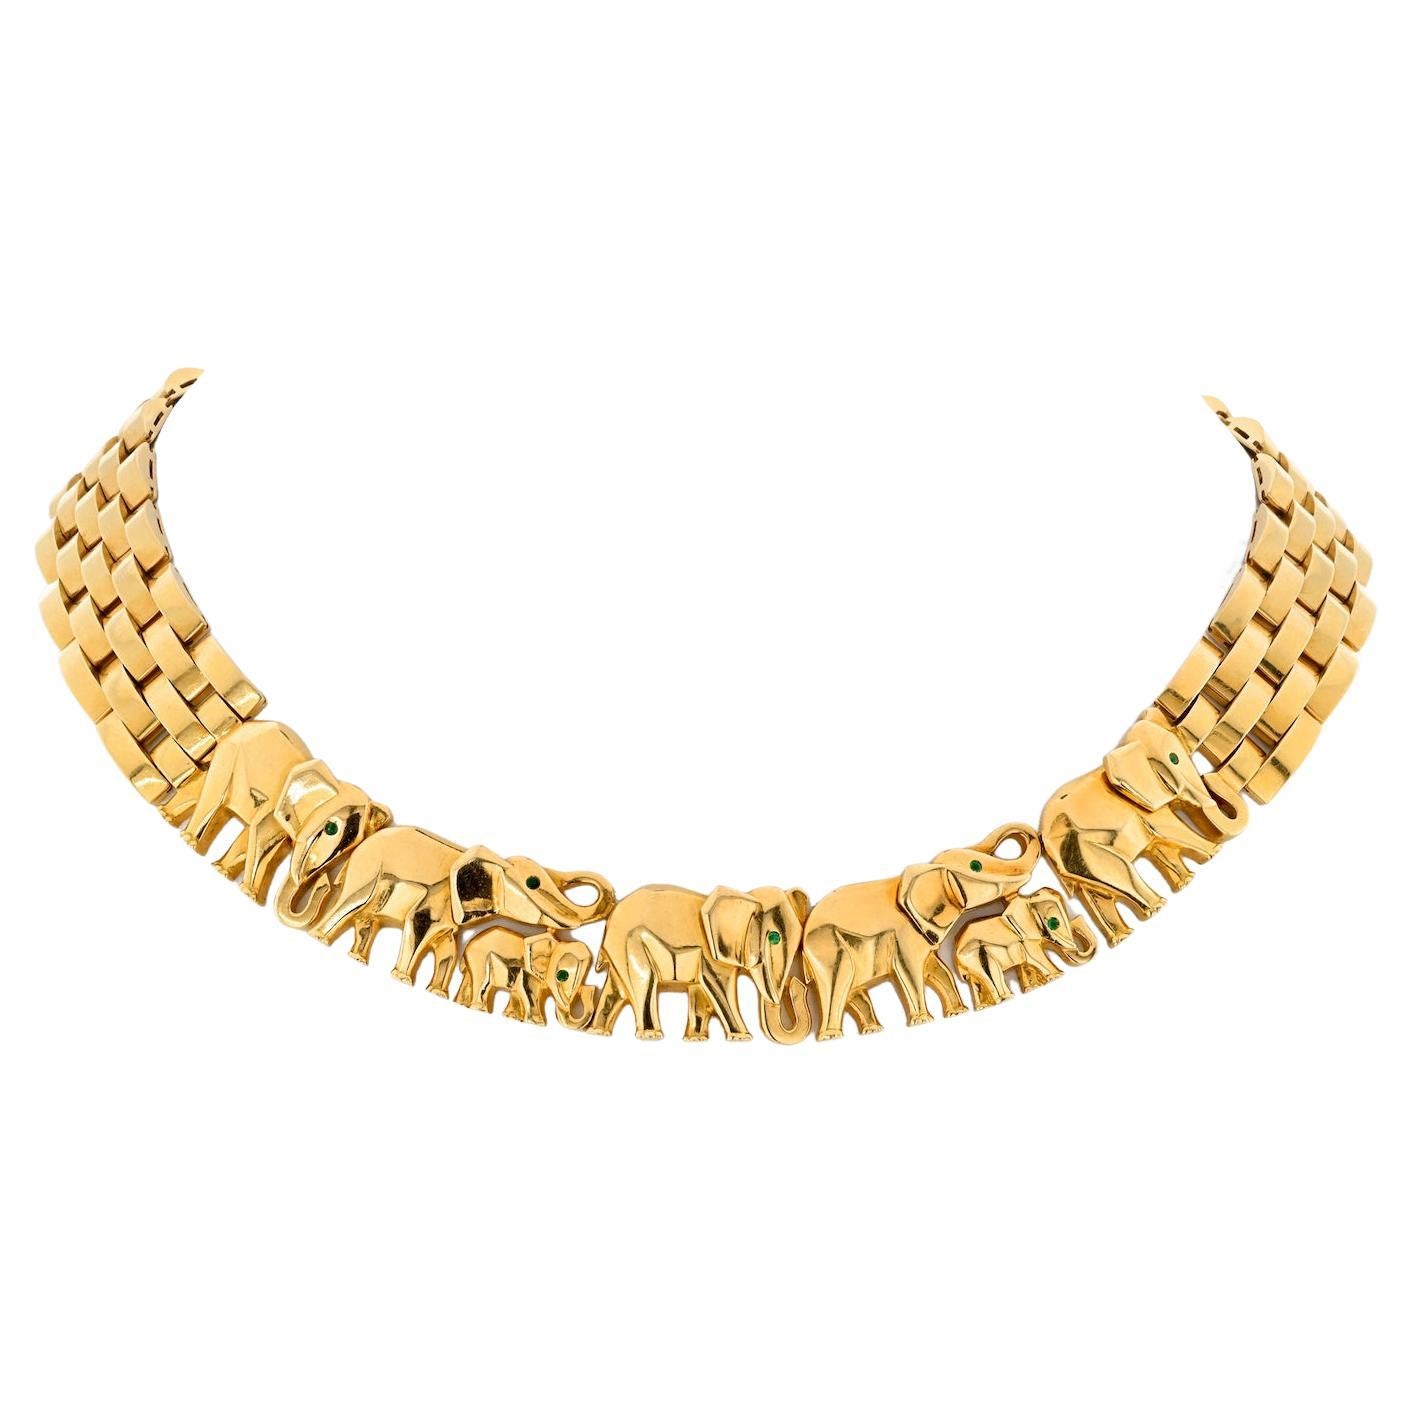 Cartier 18K Yellow Gold Walking Elephant Maillon Necklace